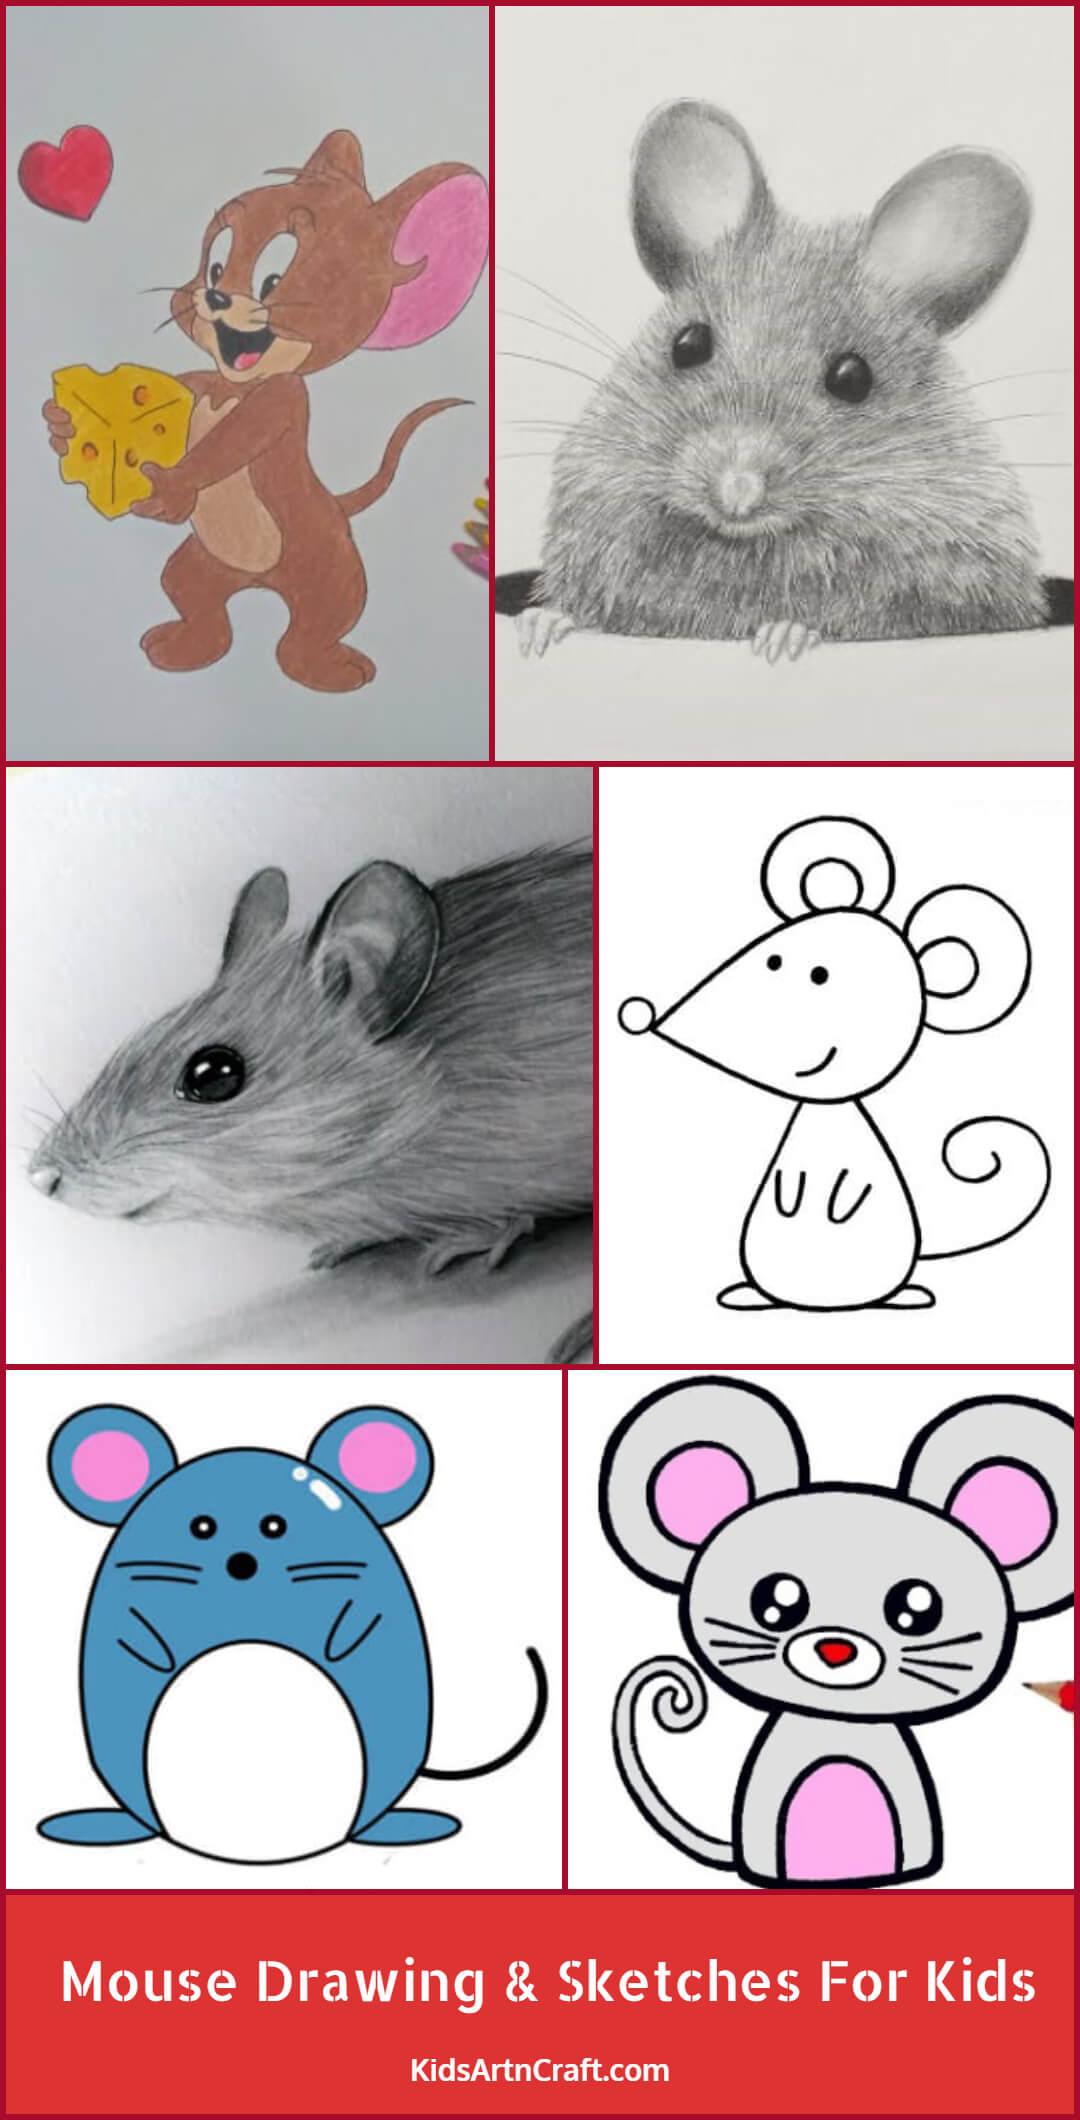 Mouse Drawing & Sketches For Kids